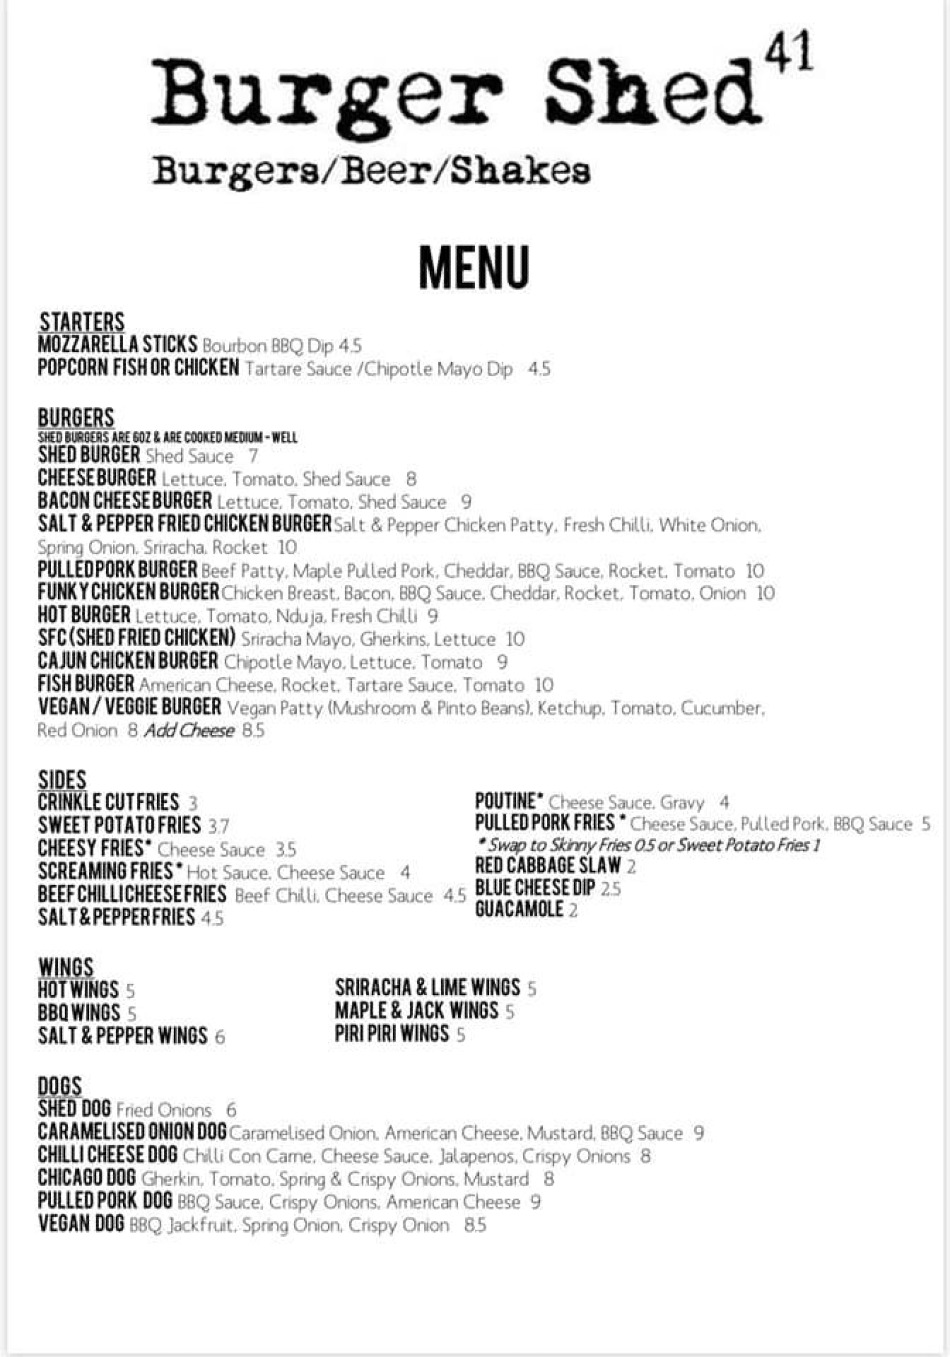 Takeaway Restaurant Menu Page - Burger Shed 41 - Chester